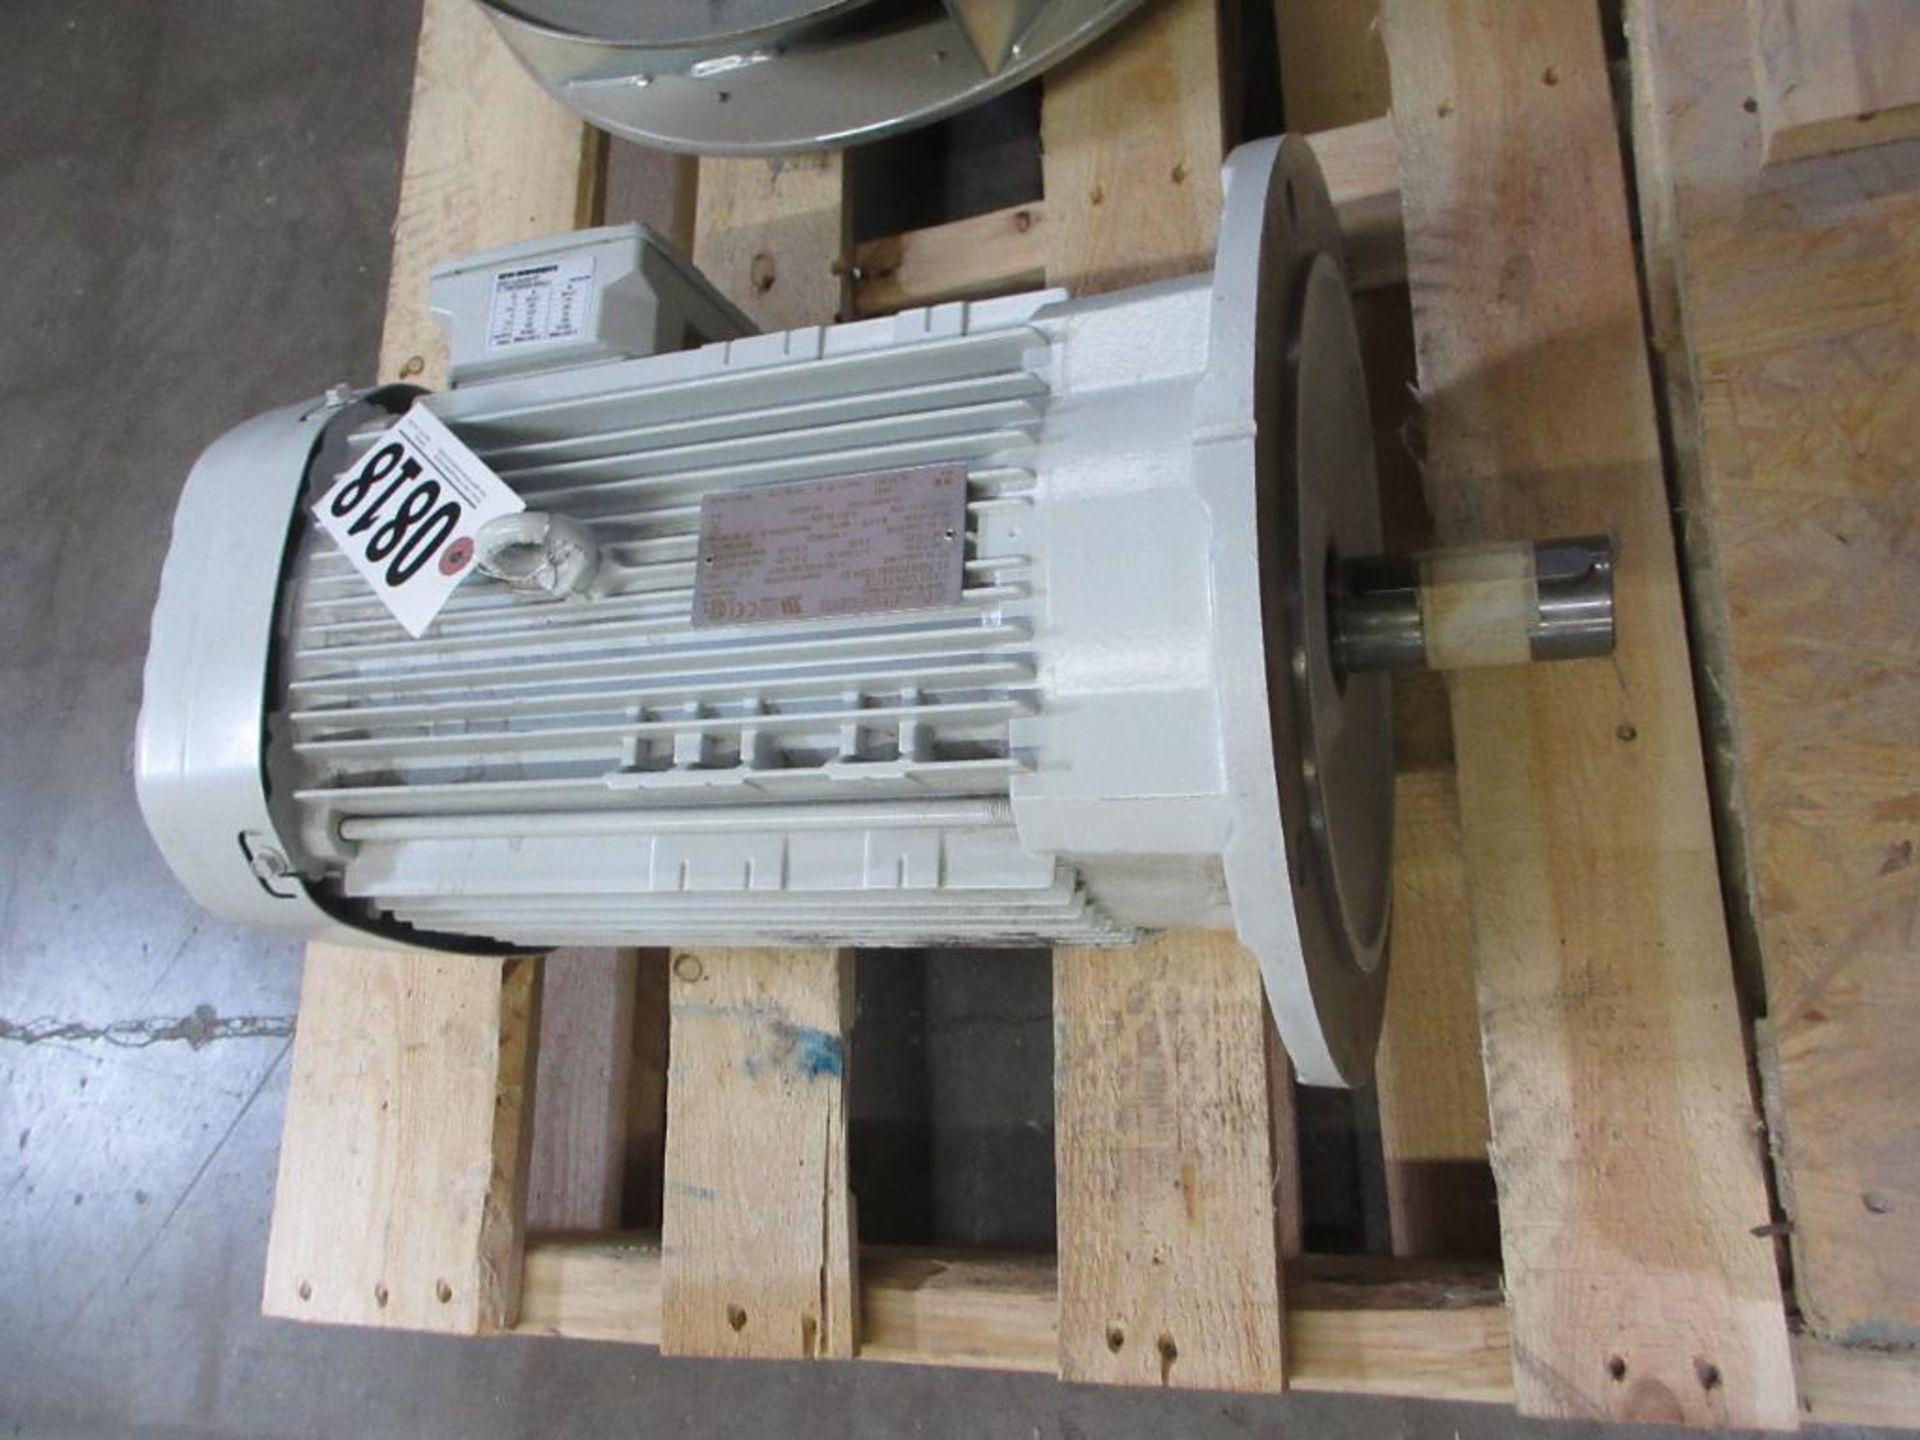 SEW EURODRIVE DRN1325S4/FF/TF 5.5kW 1464 RPM FF265 FRAME ELECTRIC MOTOR (THIS LOT IS FOB CAMARILLO C - Image 5 of 5